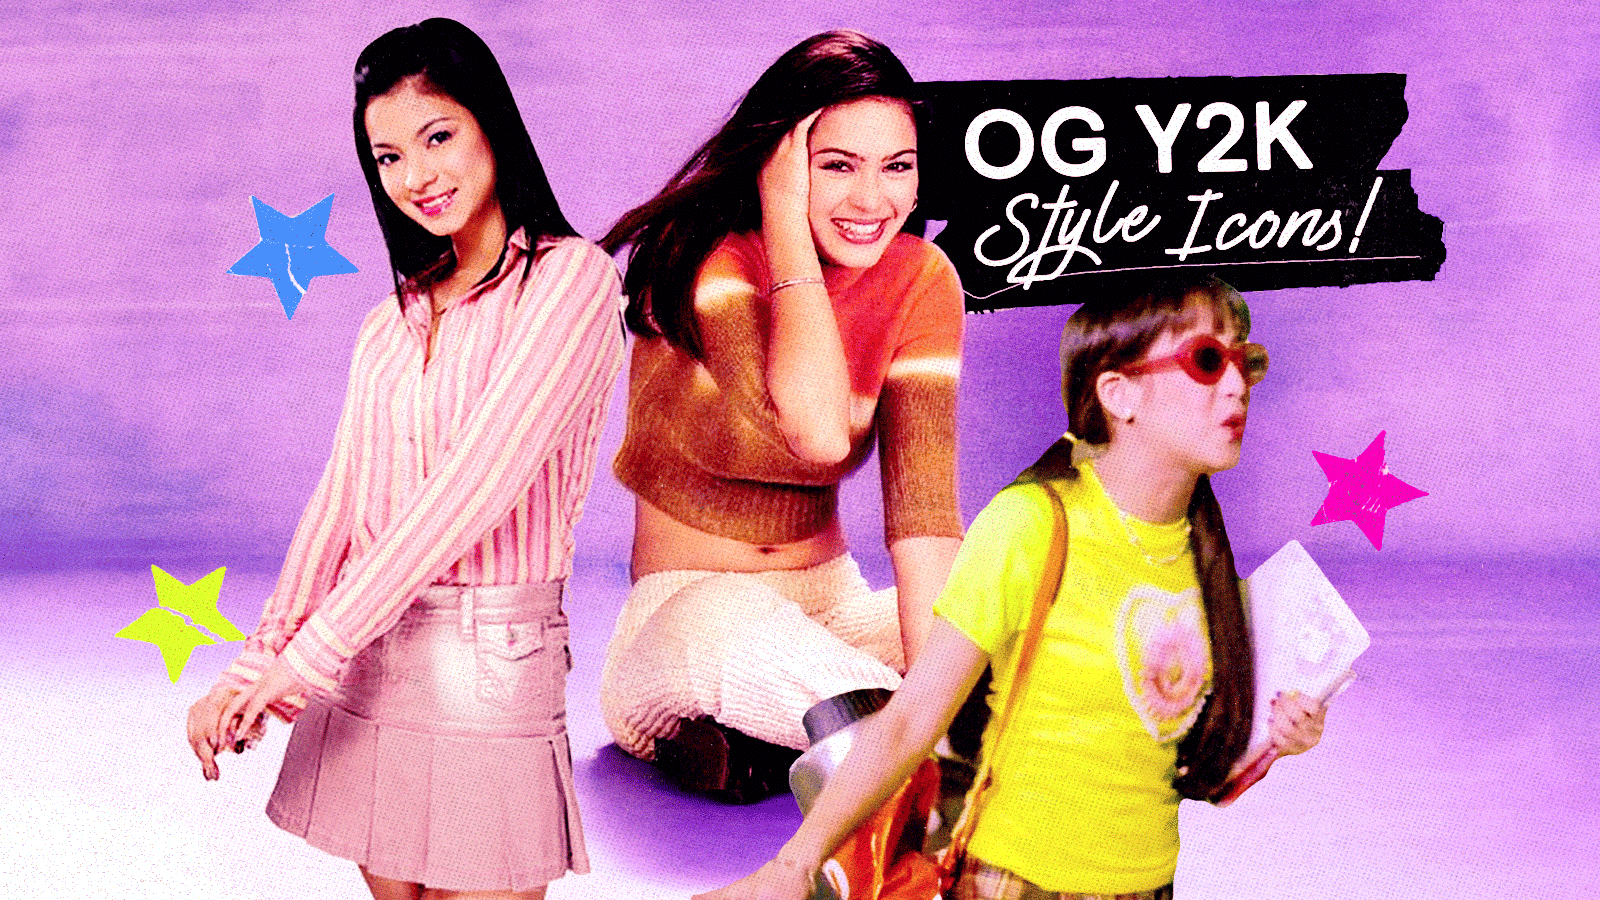 6 Pinoy Celebrities That Are Total Y2K Style Icons